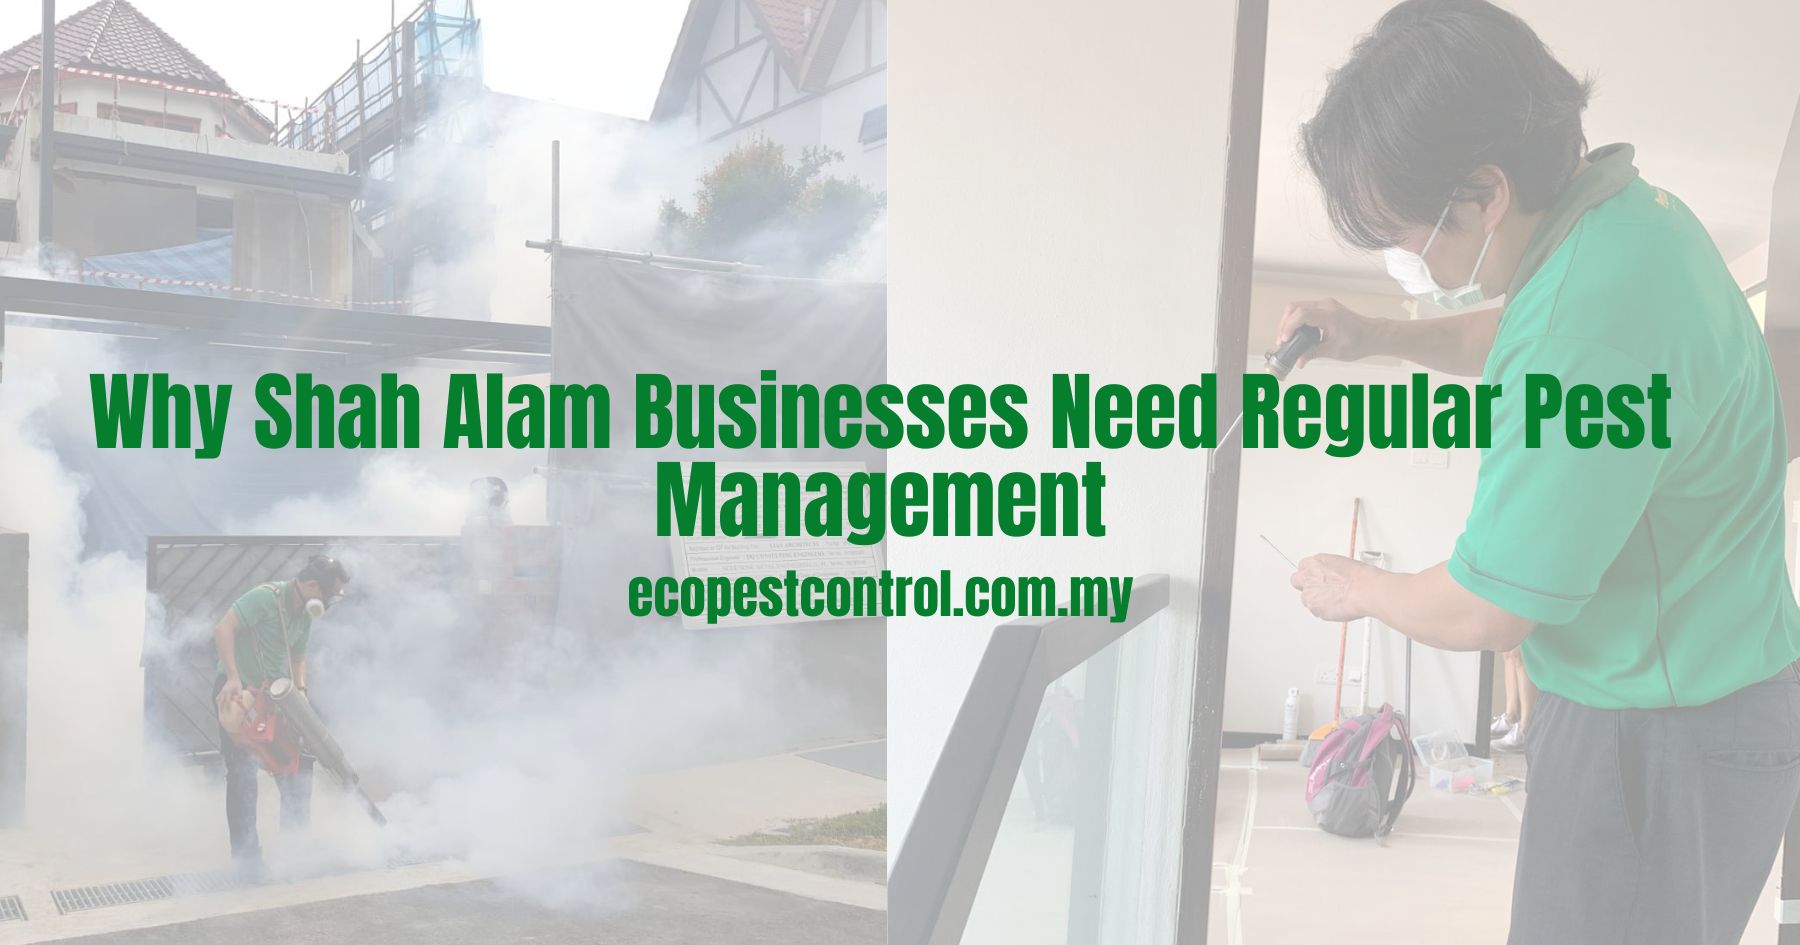 Why Shah Alam Businesses Need Regular Pest Management